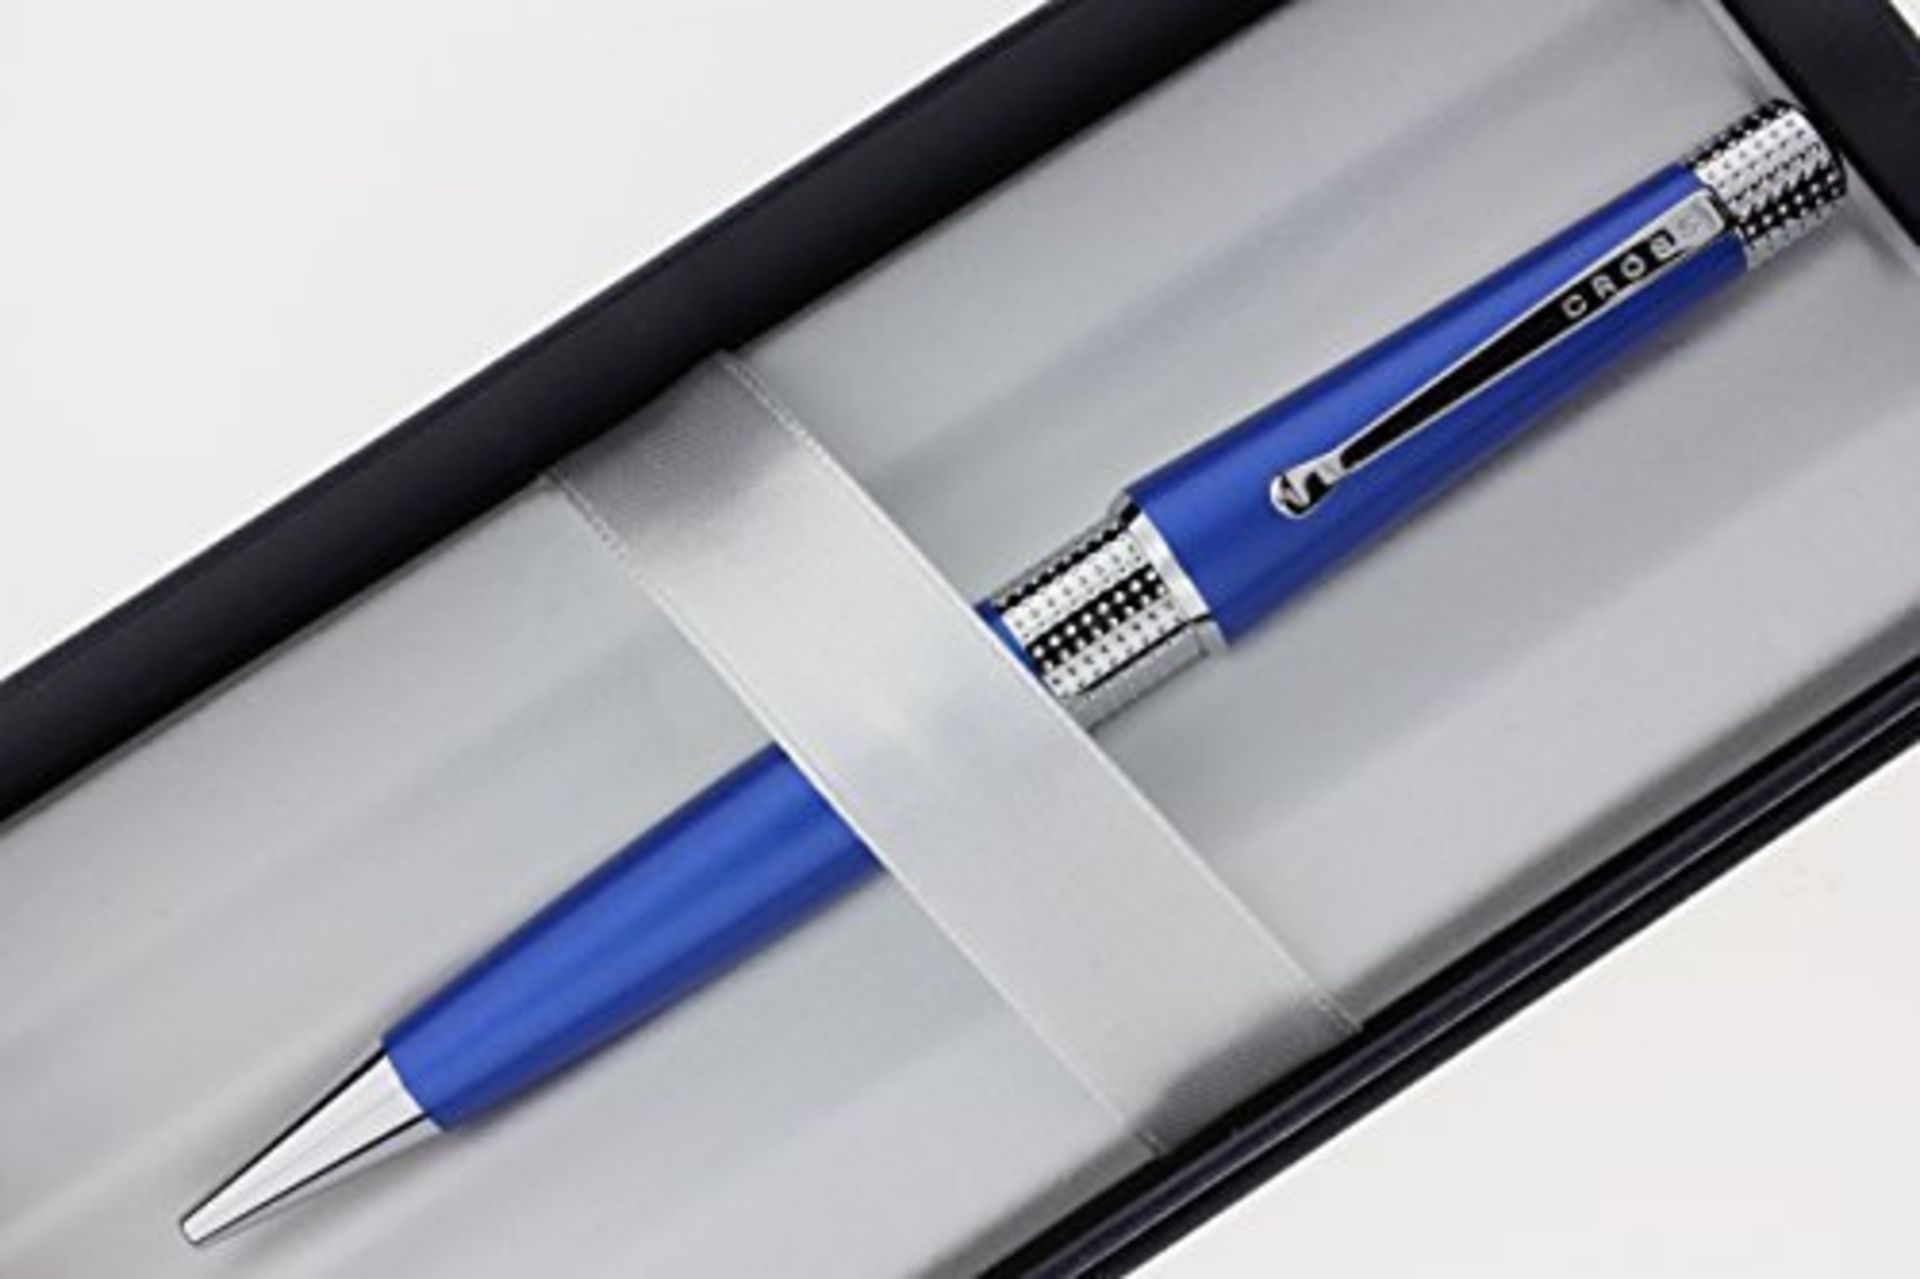 V *TRADE QTY* Brand New Cross Beverly Blue and Chrome Ball Point Pen with Twist Retract Mechanism in